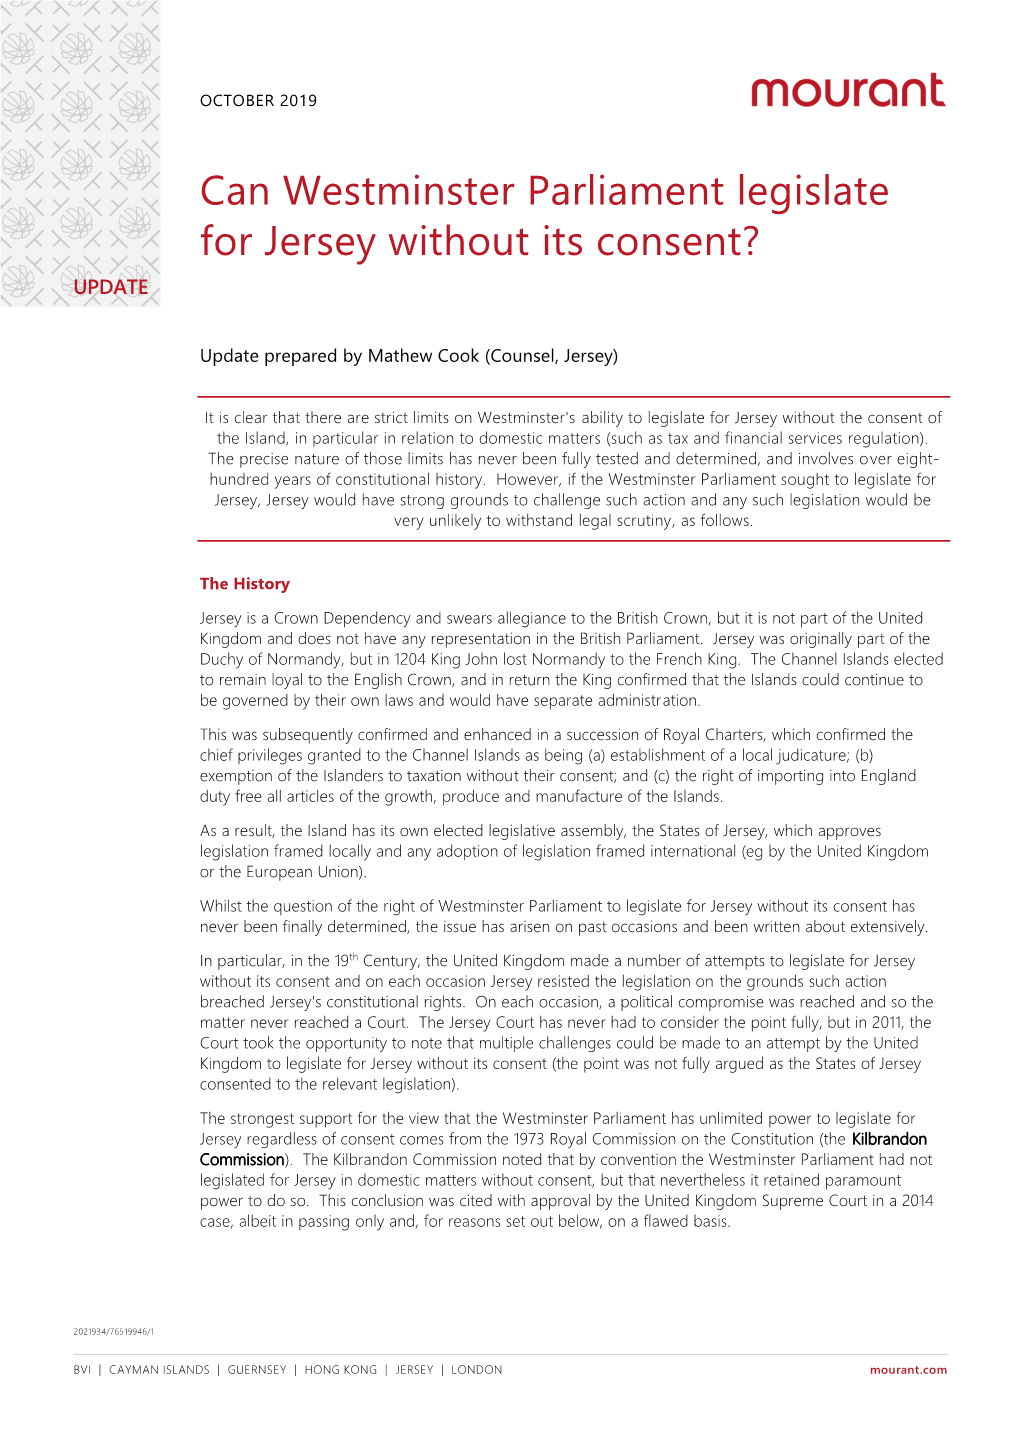 Can Westminster Parliament Legislate for Jersey Without Its Consent? UPDATE